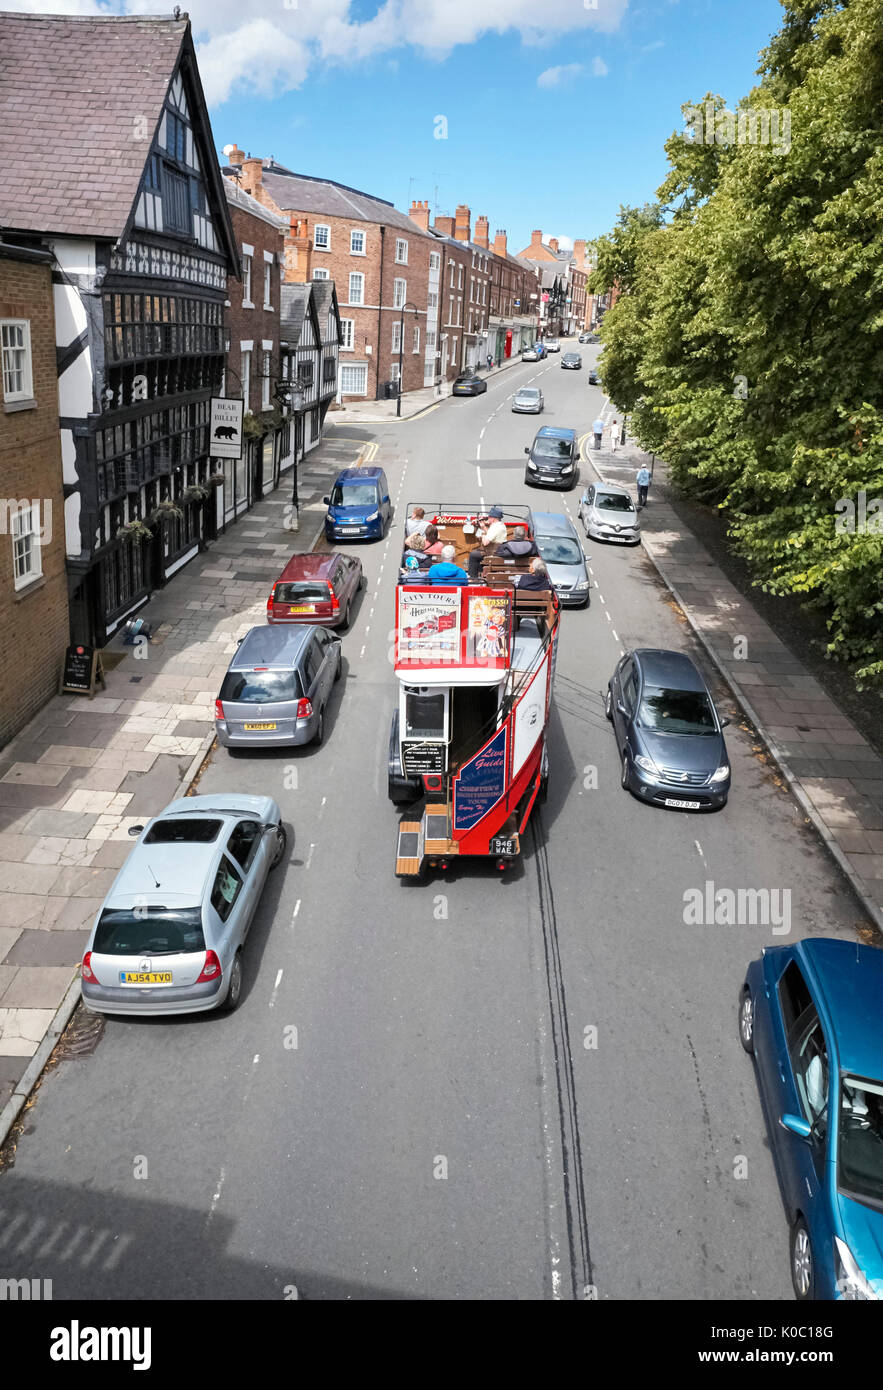 Open top sightseeing bus in Chester Foto Stock